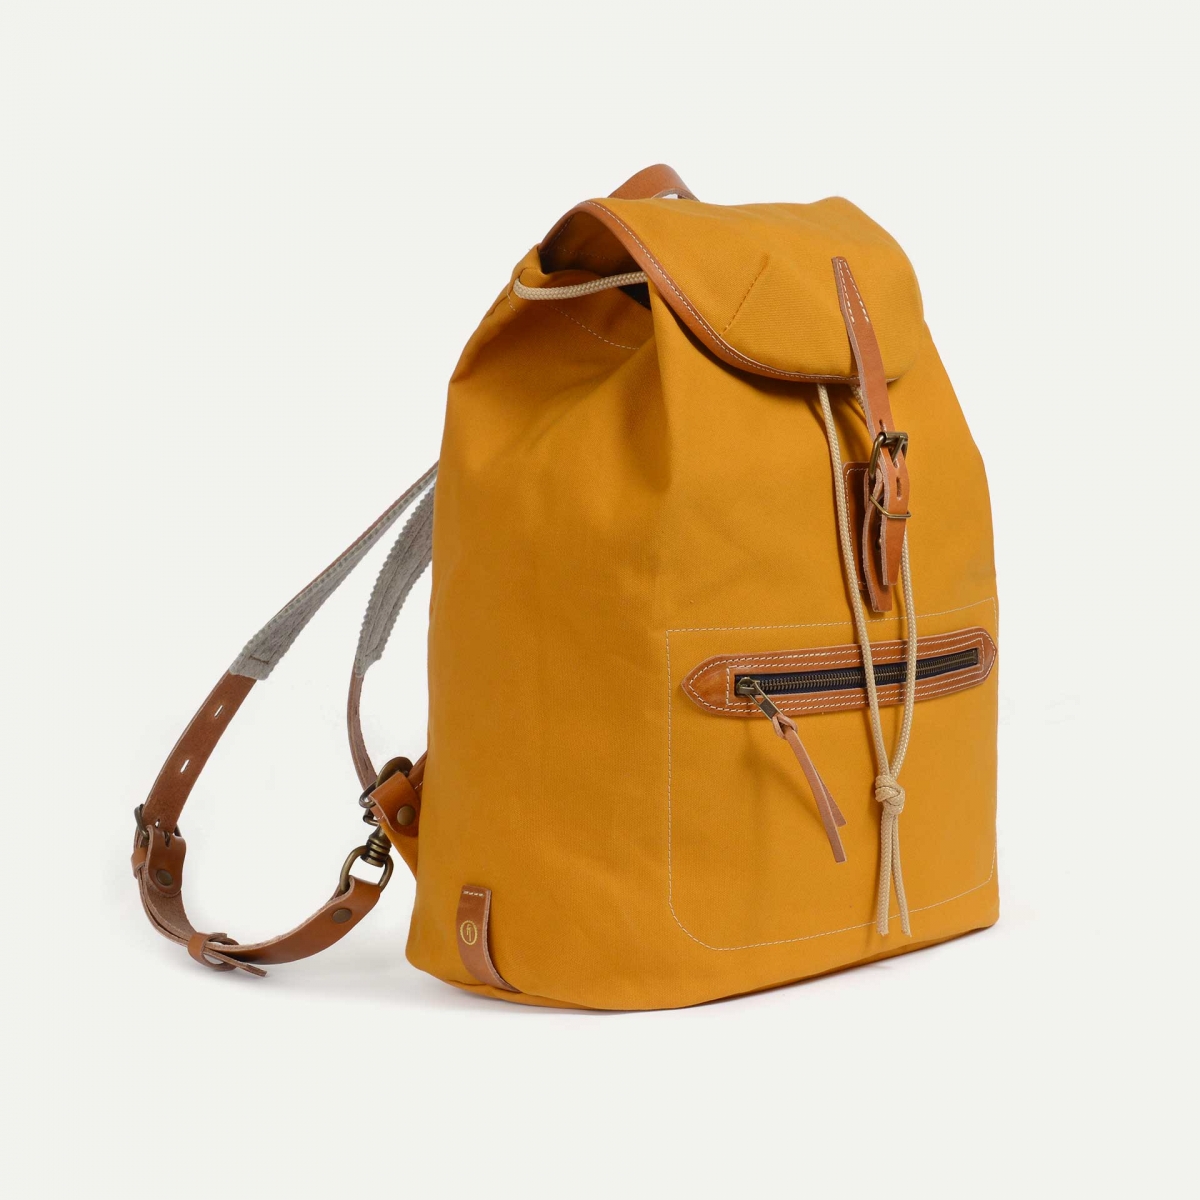 Camp backpack - Yellow ochre (image n°2)